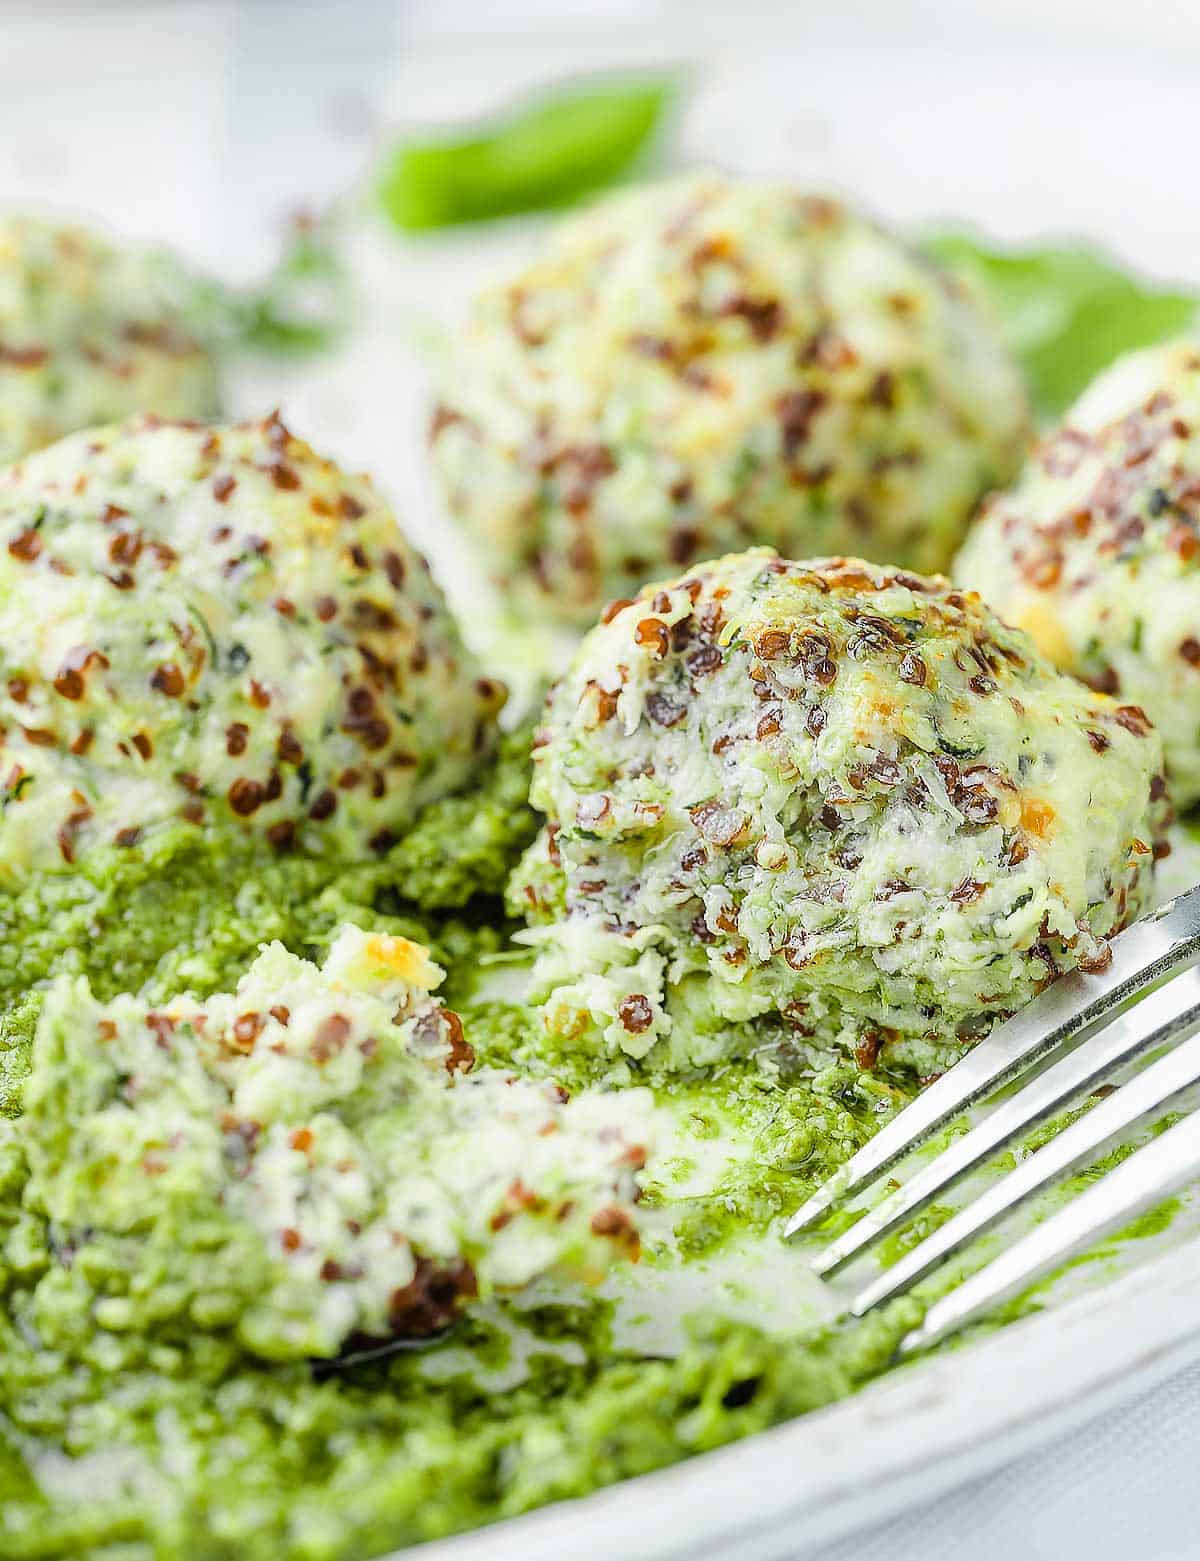 A close up image of chicken zucchini meatball.